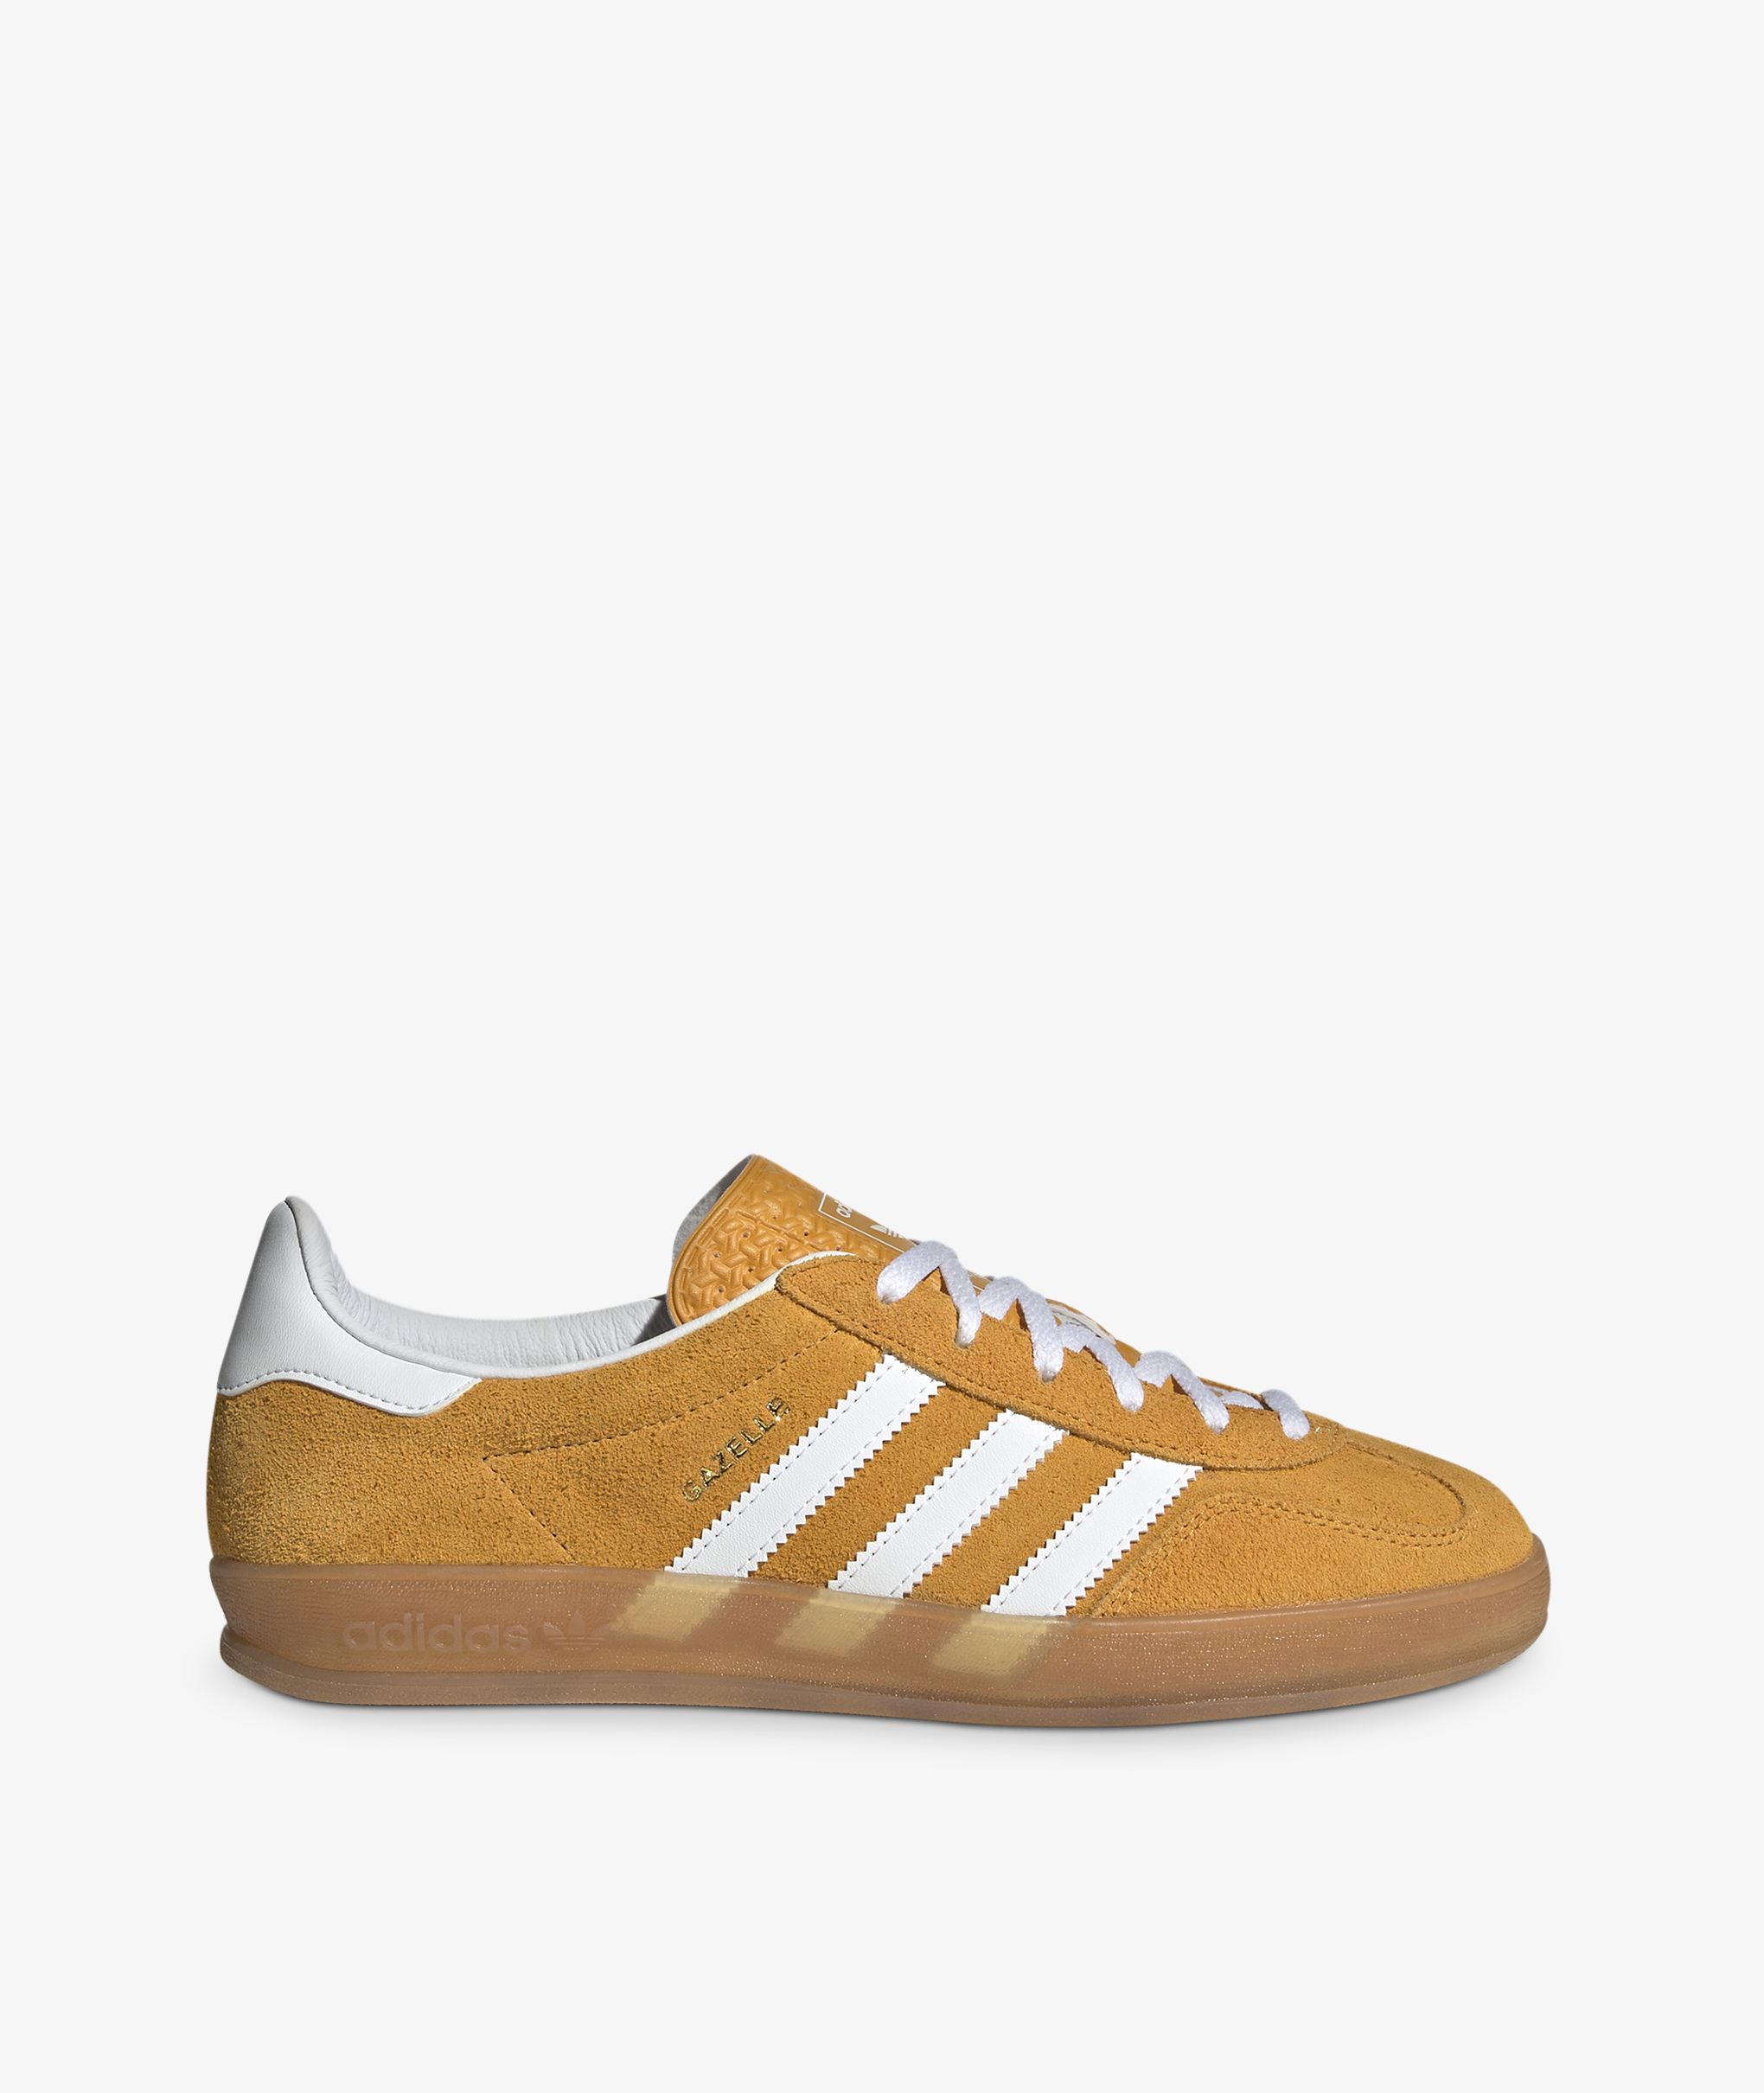 Norse Store | Shipping Worldwide - adidas Originals GAZELLE - SUPCOL/FTWWH